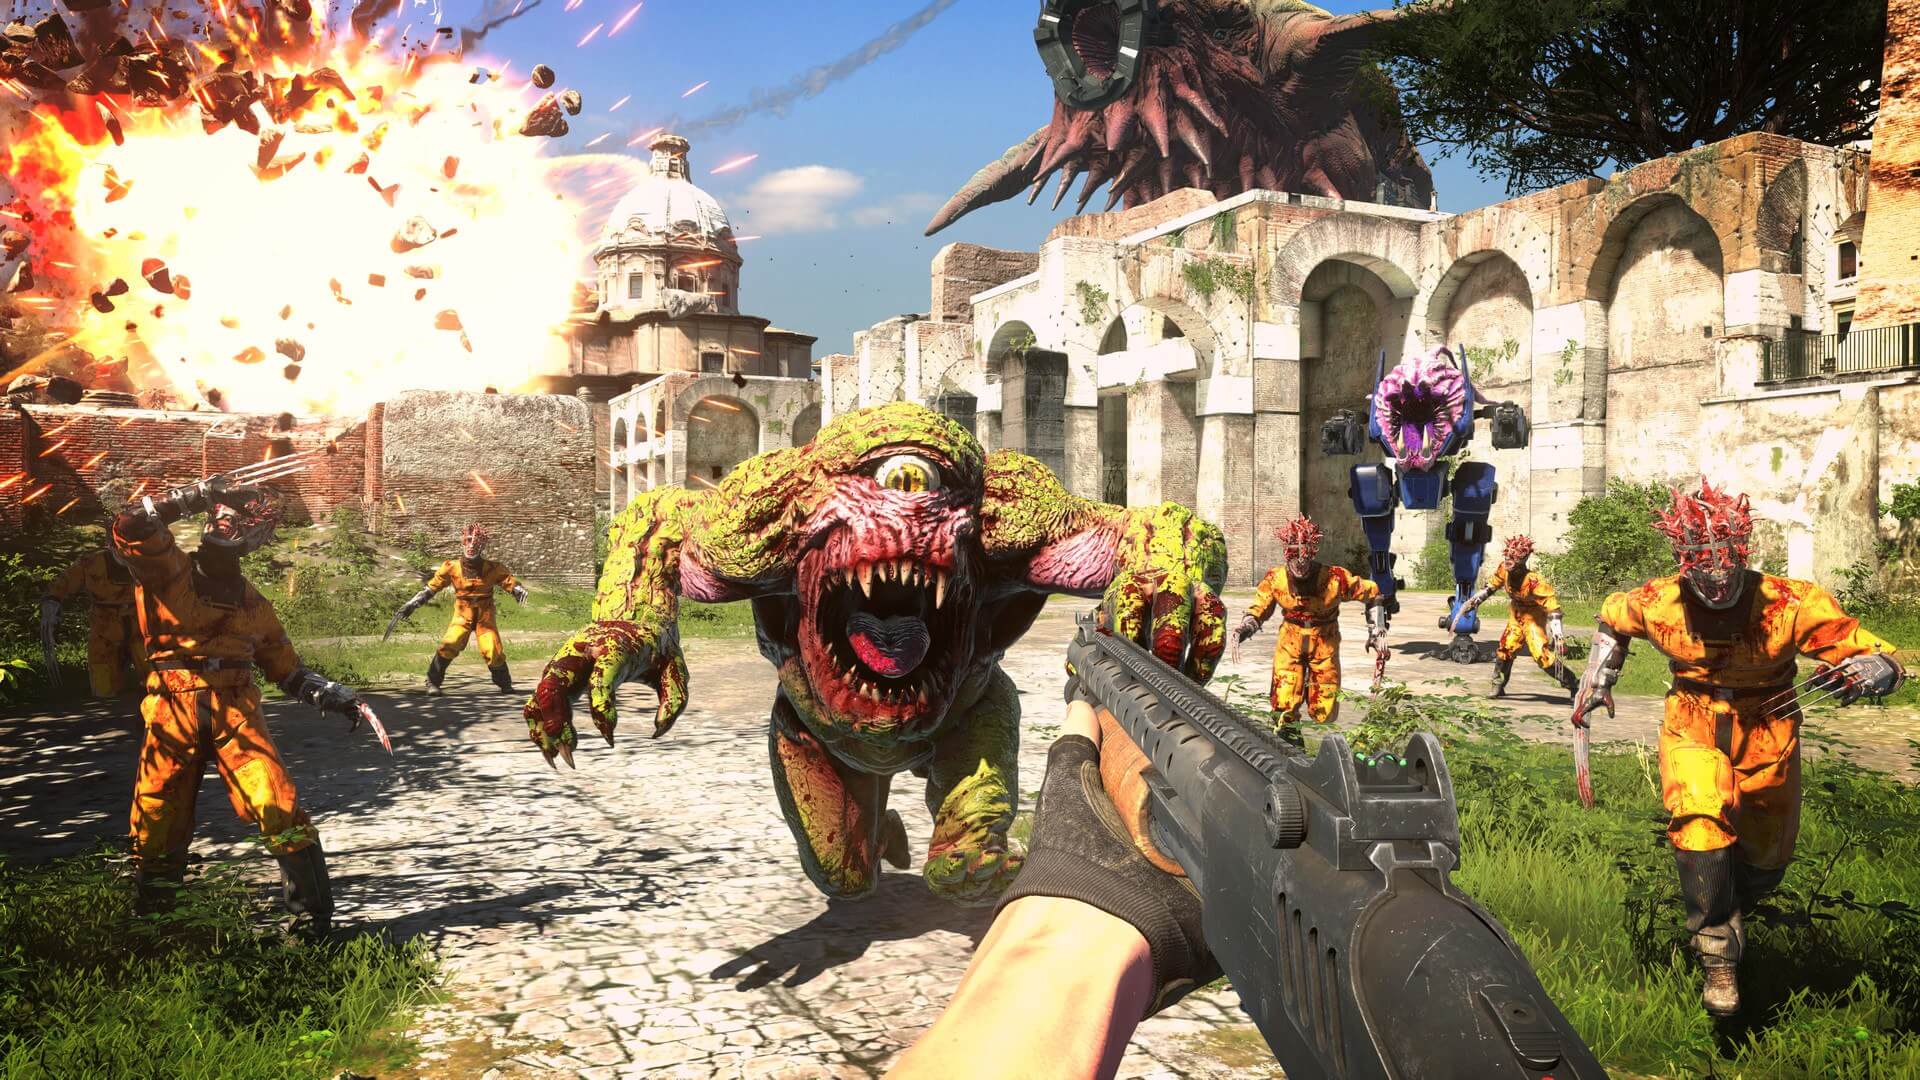 You'll need some serious hardware to play Serious Sam 4